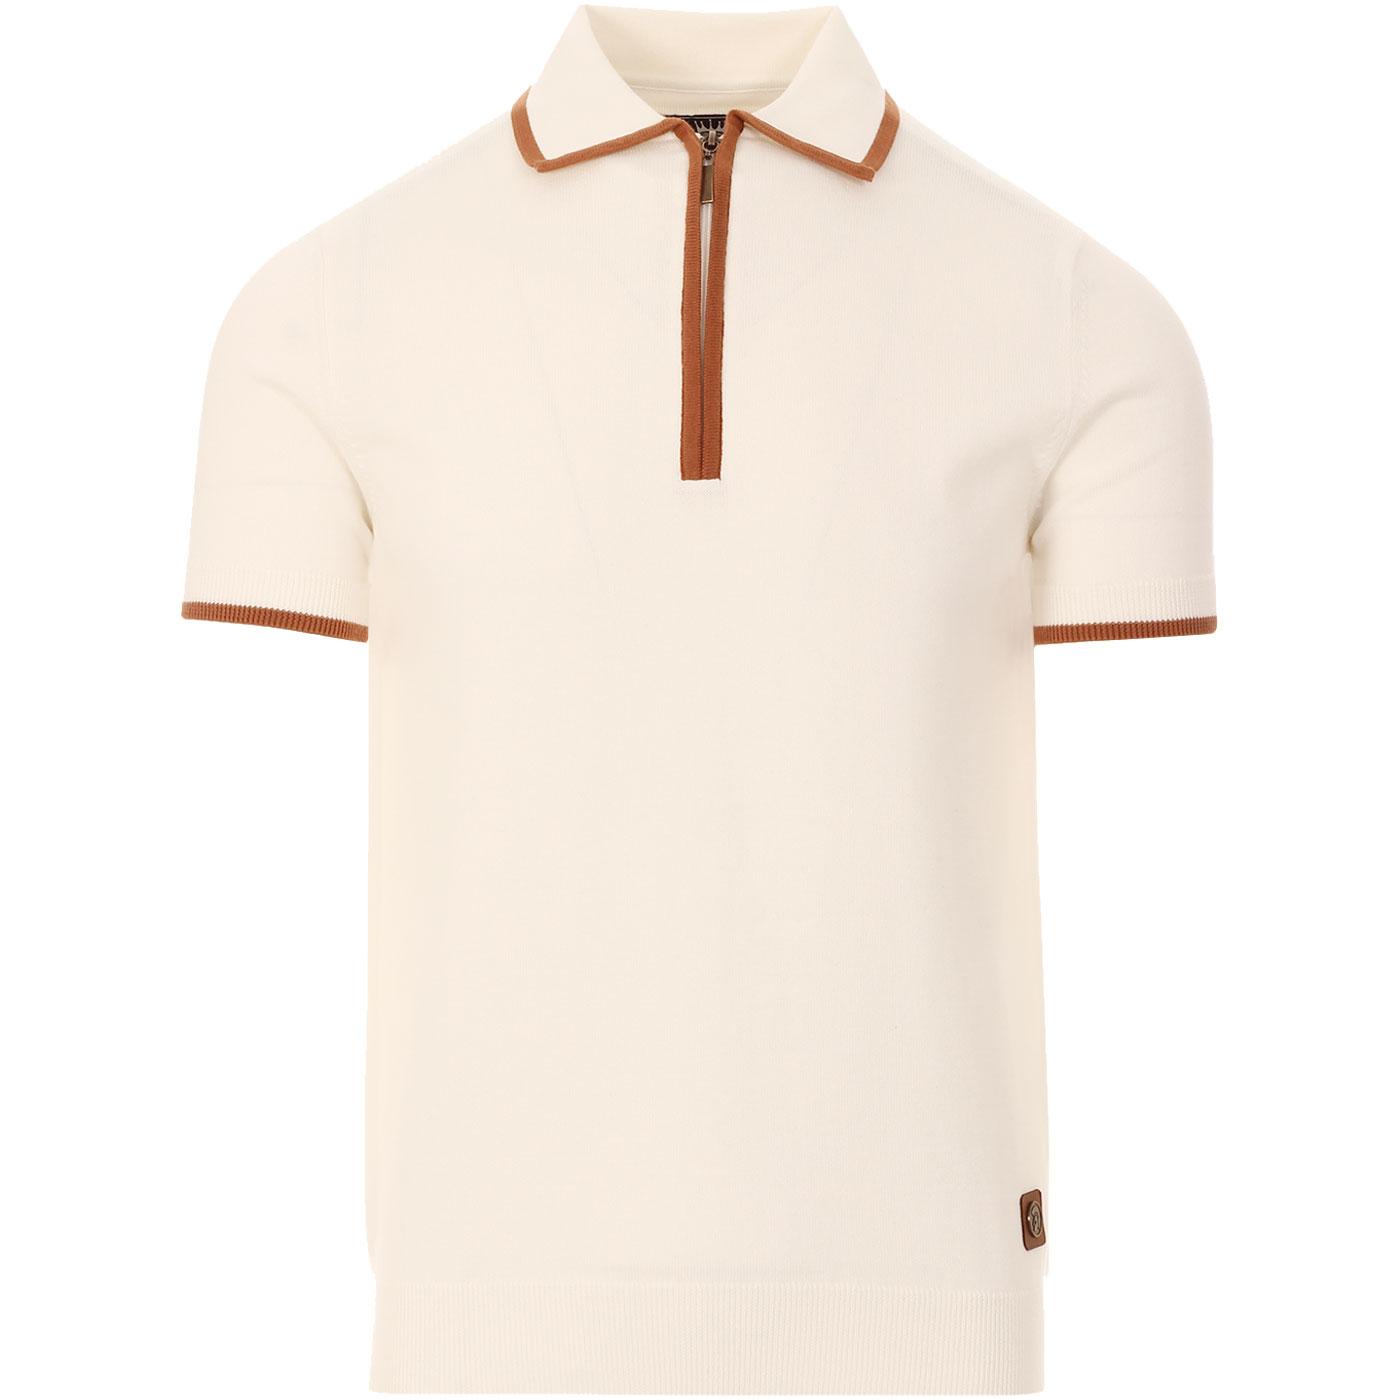 TROJAN RECORDS Mod Zip Placket Knitted Polo Top E